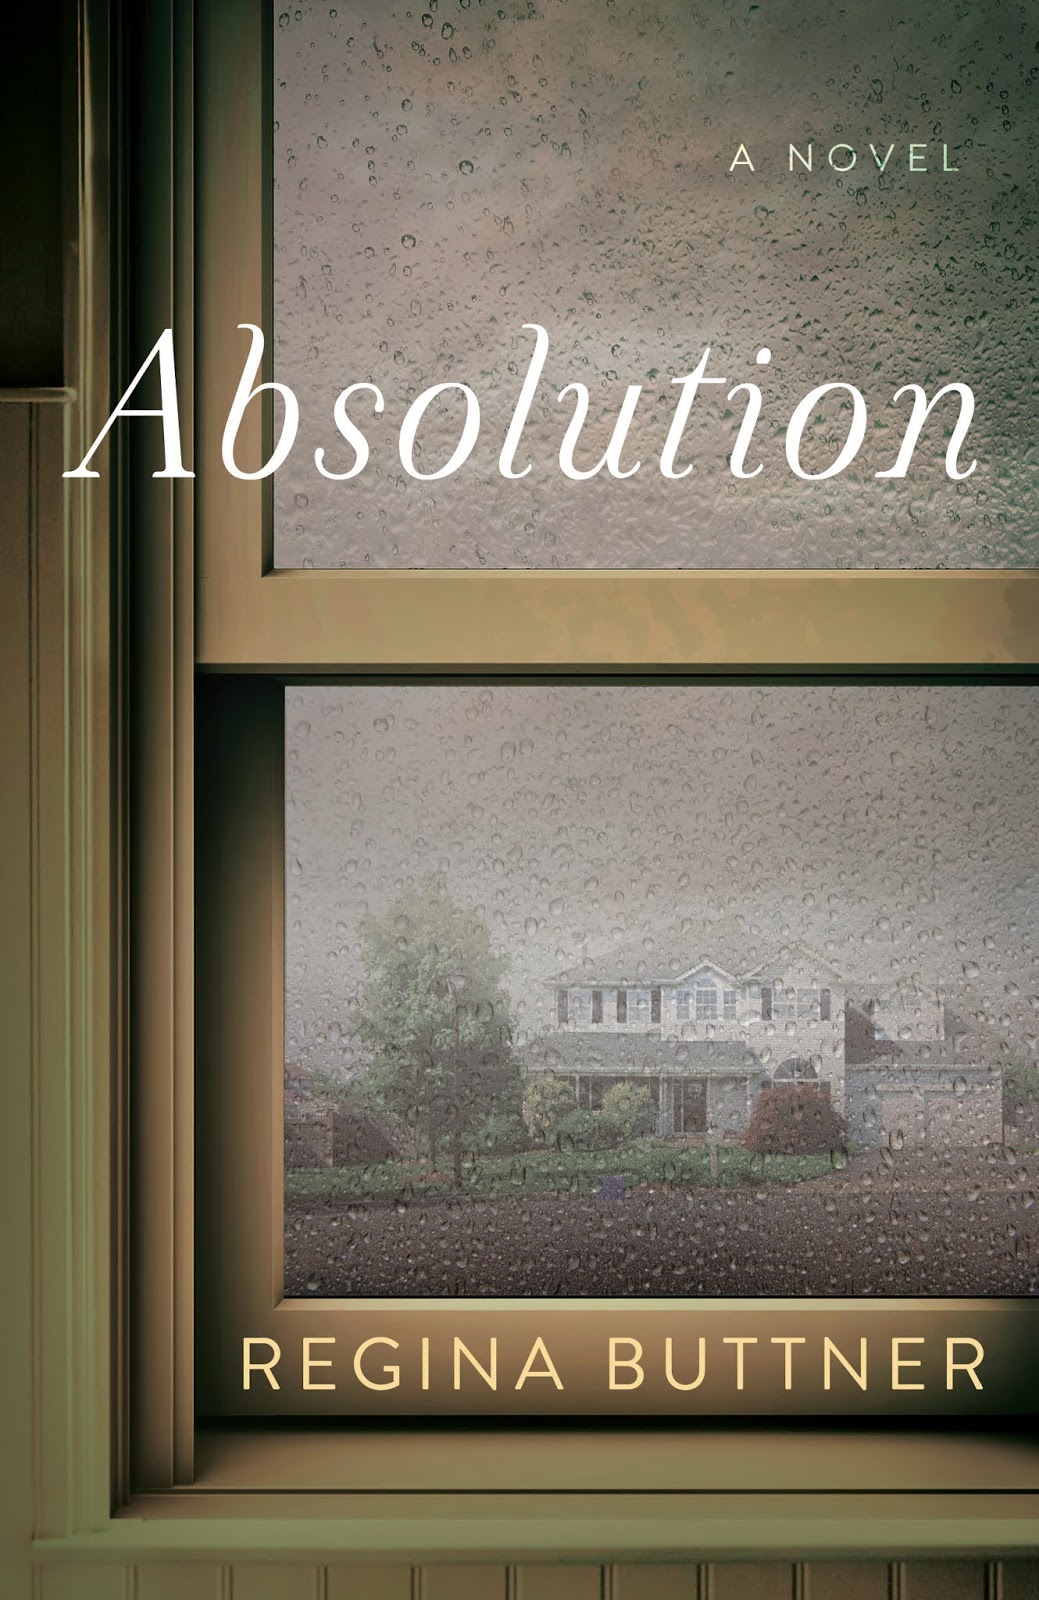 Review: Absolution by Regina Buttner